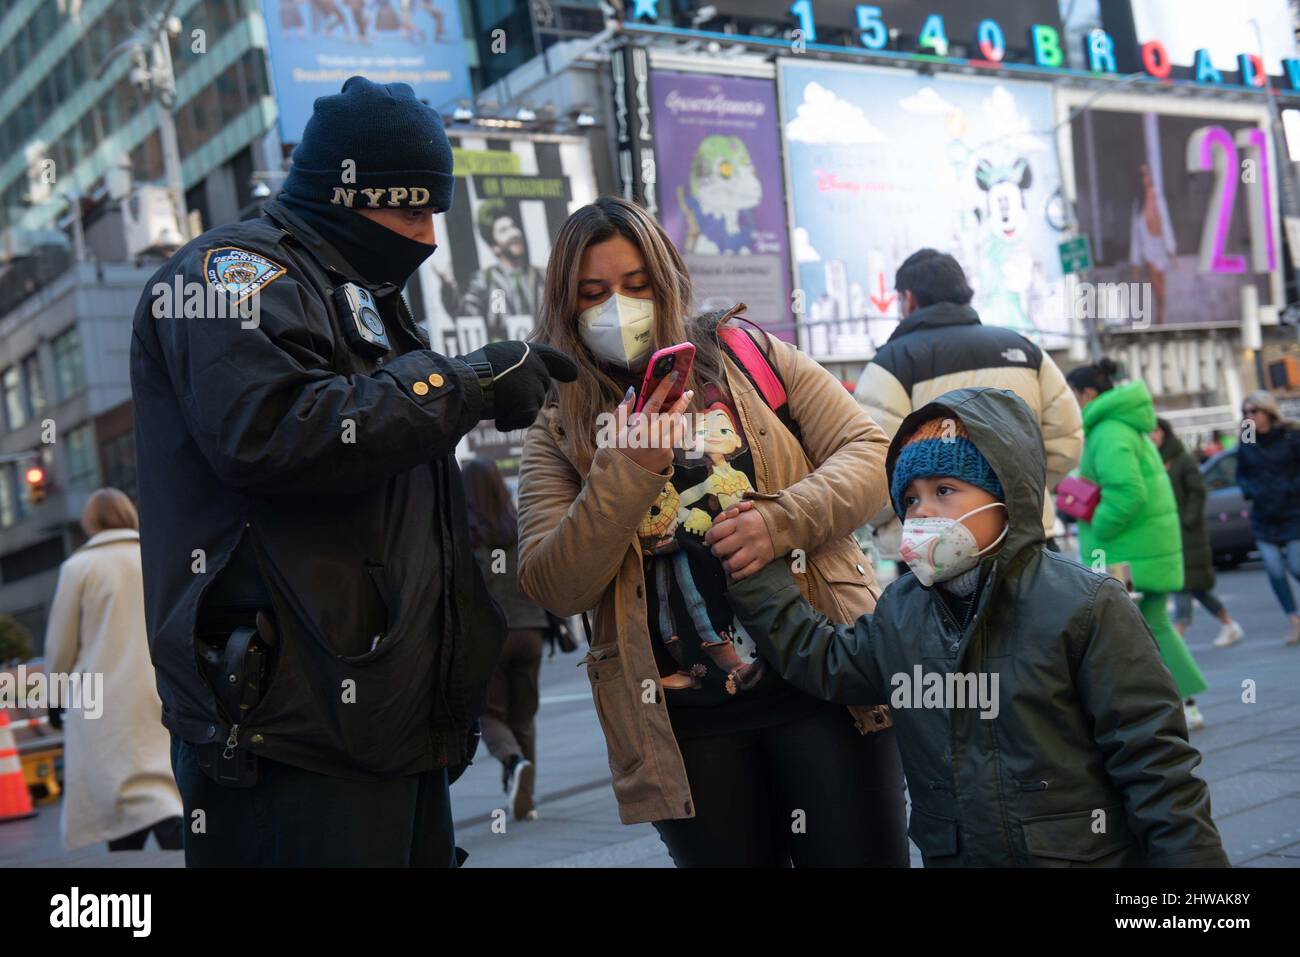 New York, USA. 05th Mar, 2022. (220305) -- NEW YORK, March 5, 2022 (Xinhua) -- A women talks with a police officer on Times Square in New York, the United States, March 4, 2022. New York City will suspend COVID-19 vaccine passport program and remove indoor mask mandate in public schools for K-12 students starting from next Monday, said New York City Mayor Eric Adams at a press briefing on Friday. The decision is based on a sharp drop of new COVID-19 cases and hospitalizations as well as 96 percent of vaccination rate among adults in the city. (Michael Appleton/Mayoral Photography Office/Handou Stock Photo